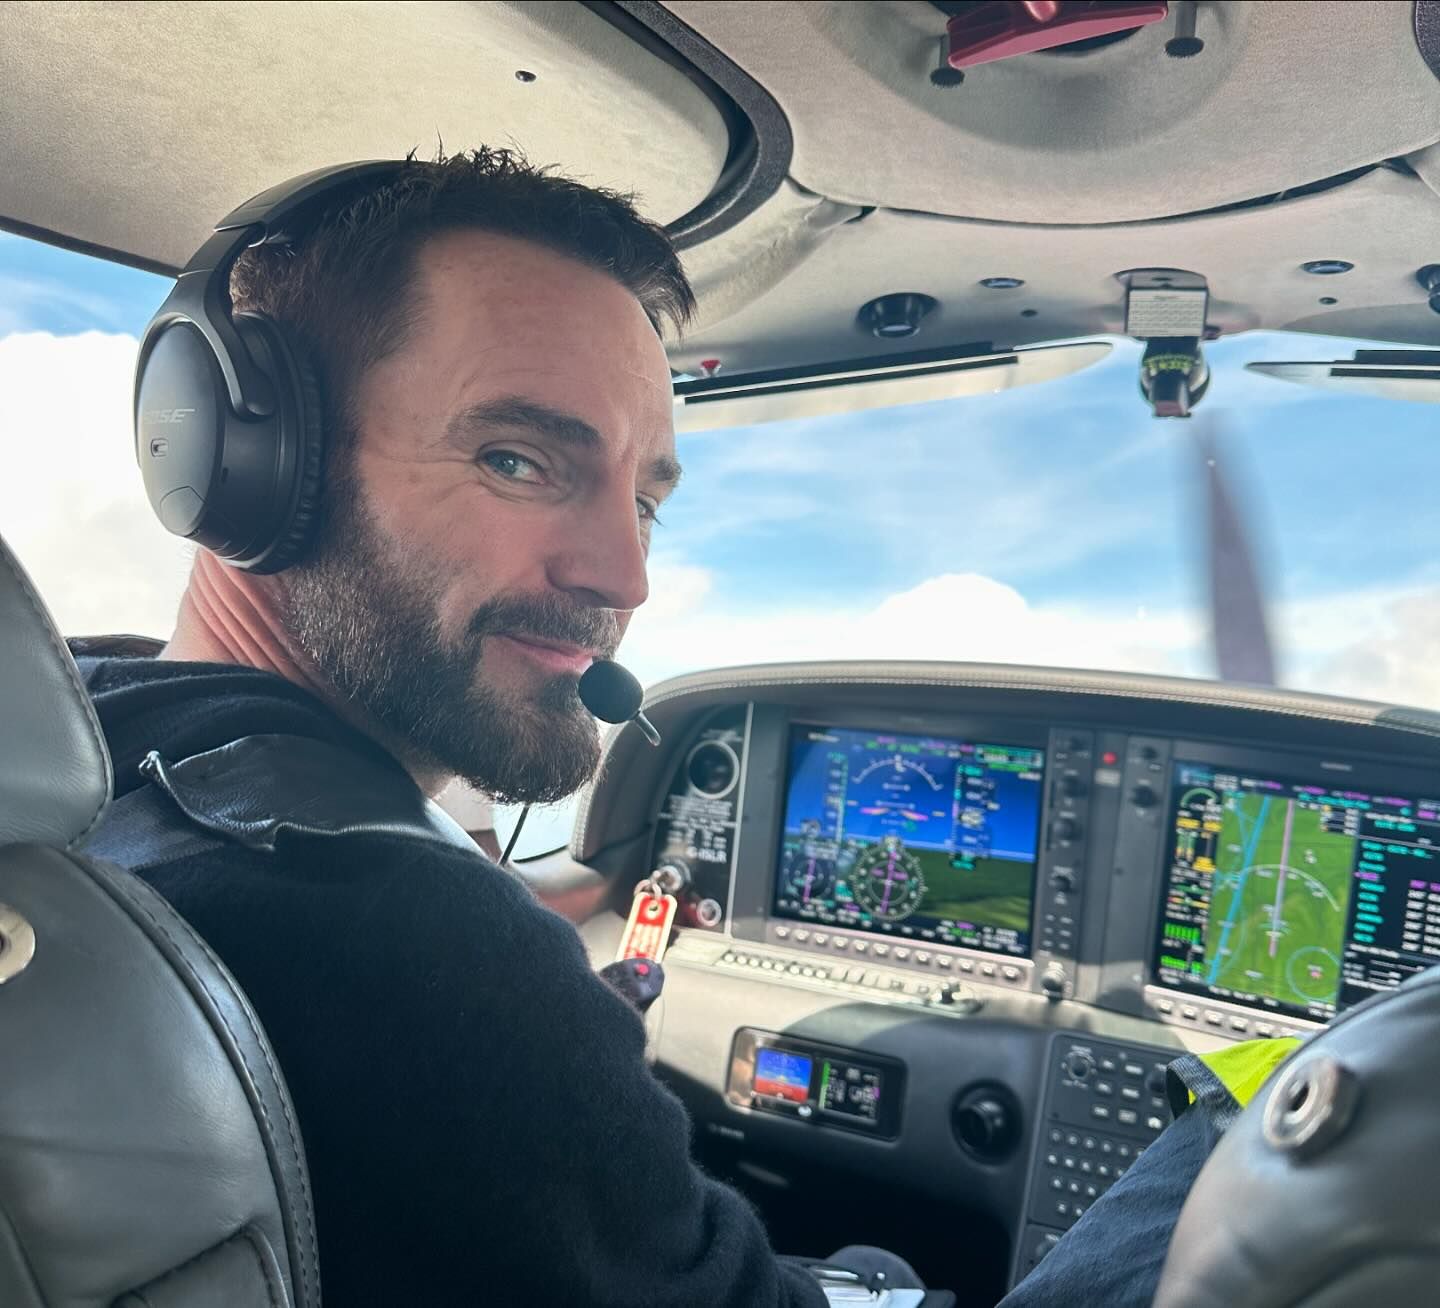 The Irish songwriter seen flying a plane in the above pic, has been dating Courteney Cox for more than 10 years, and has kept a low profile for most of that time